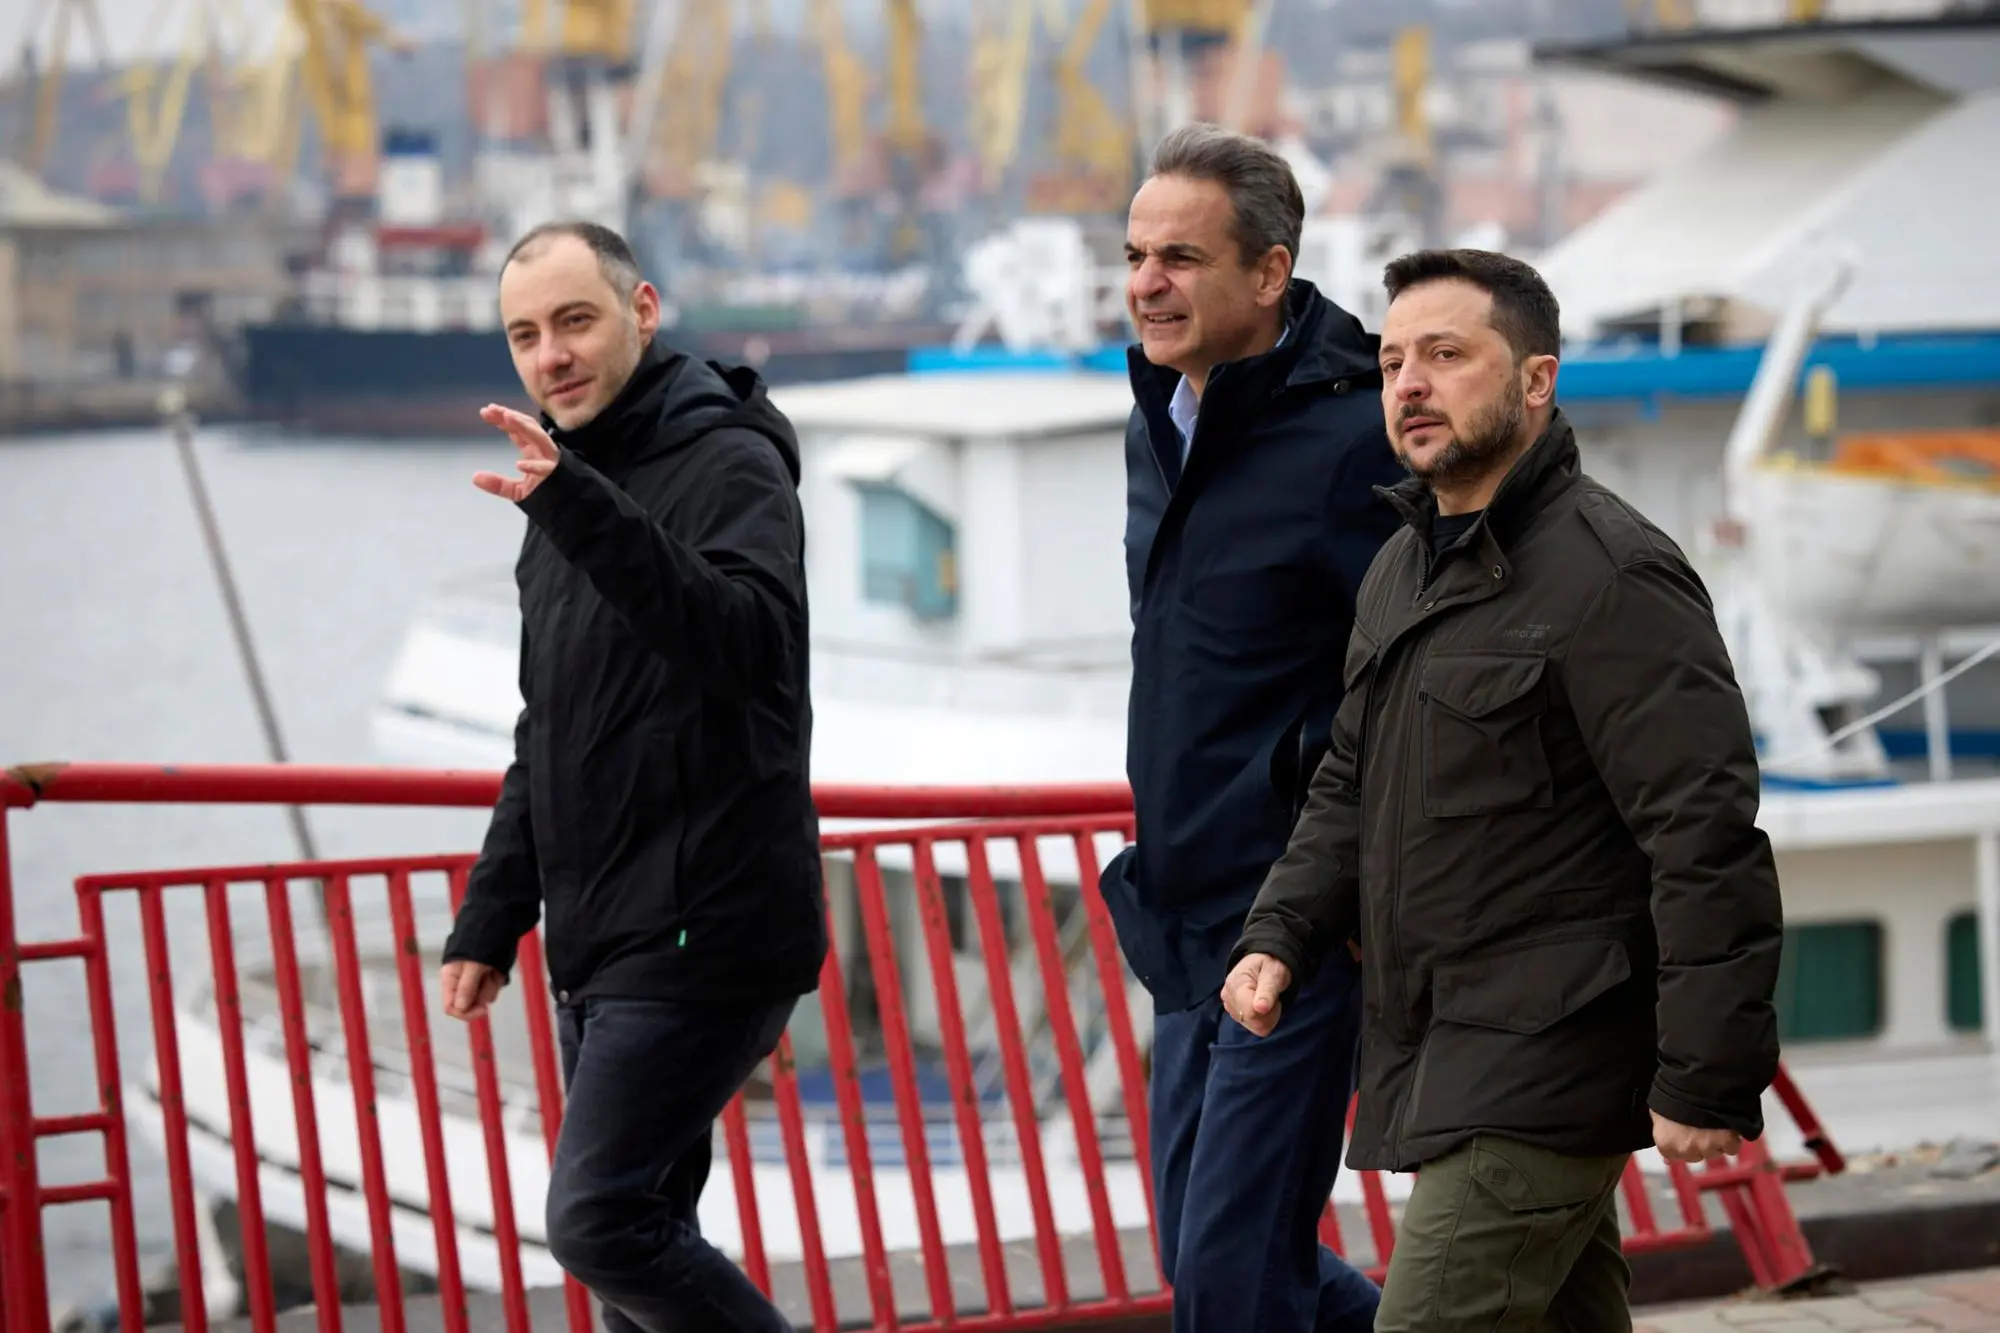 epa11202370 A handout photo made available by the presidential press service shows Ukrainian President Volodymyr Zelensky (R) and Greek Prime Minister Kyriakos Mitsotakis (C) visiting the seaport during their meeting in the southern Ukrainian city of Odesa, 06 March 2024. The Greek prime minister arrived in Odesa to meet with top Ukrainian officials amid the Russian invasion. EPA/PRESIDENTIAL PRESS SERVICE HANDOUT HANDOUT EDITORIAL USE ONLY/NO SALES HANDOUT EDITORIAL USE ONLY/NO SALES